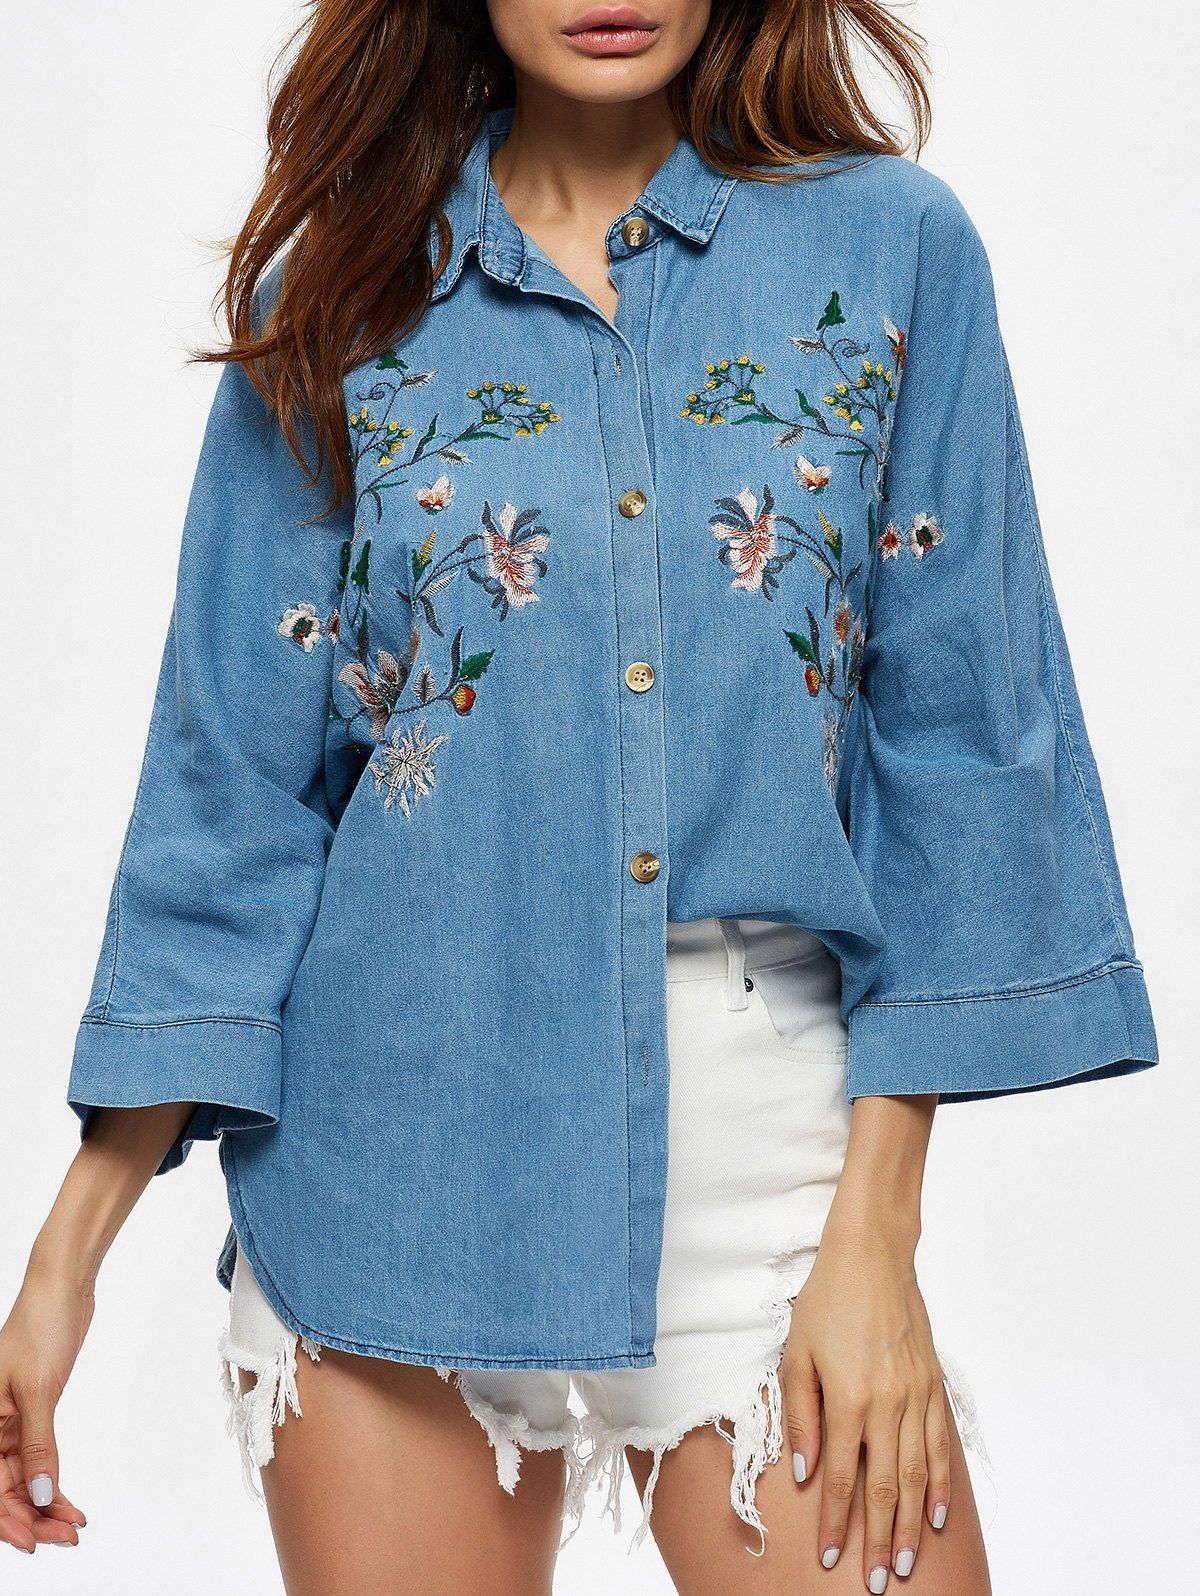 Floral Embroidered Single Breasted Denim Shirt - BLUE ONE SIZE(FIT SIZE XS TO M)